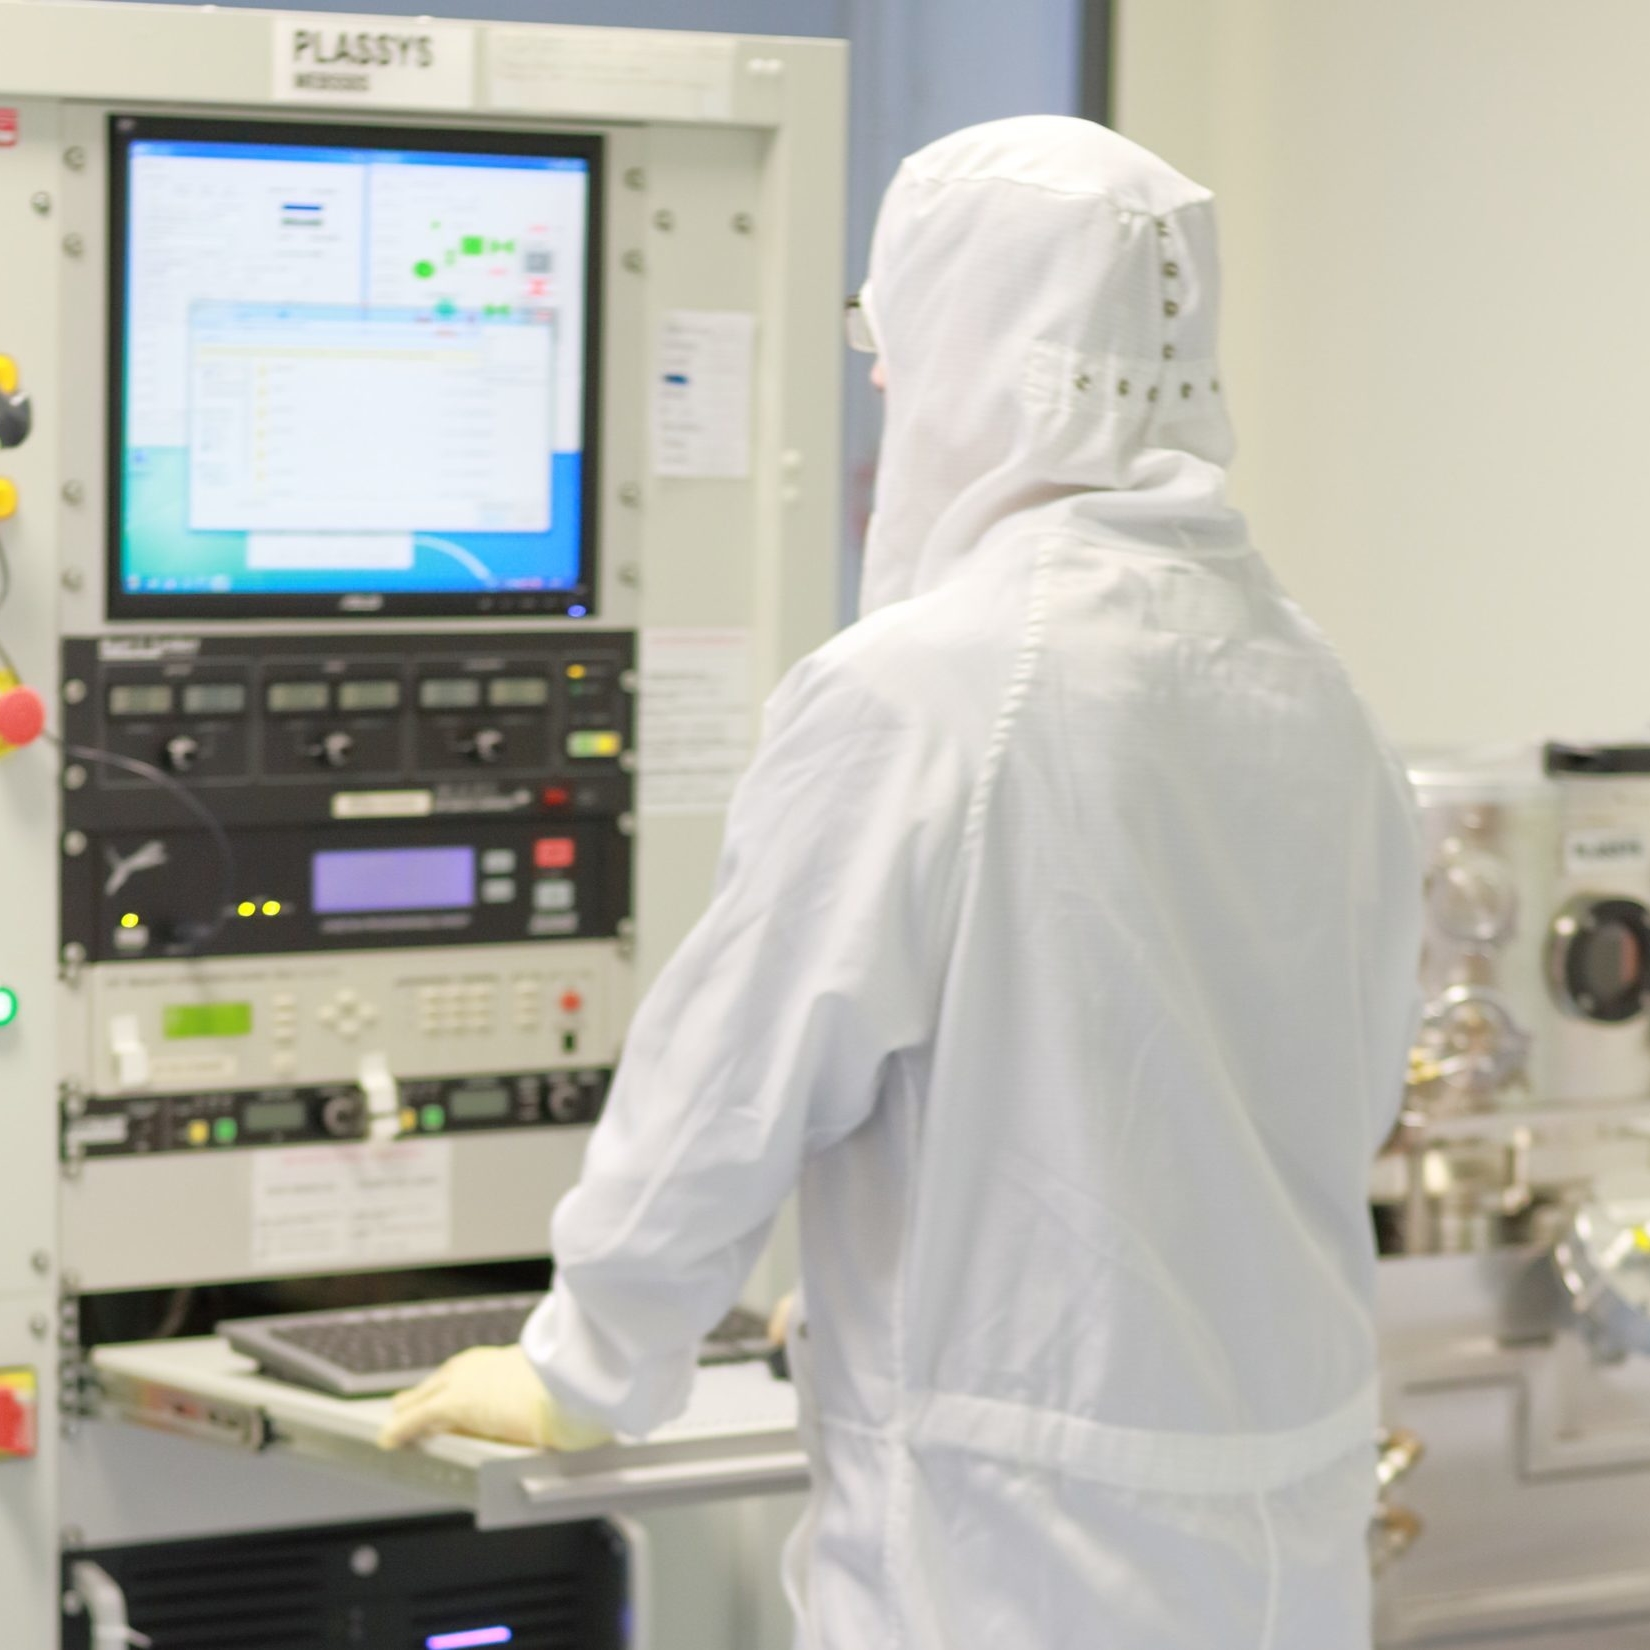 Professional in CleanRoom wear working in computer